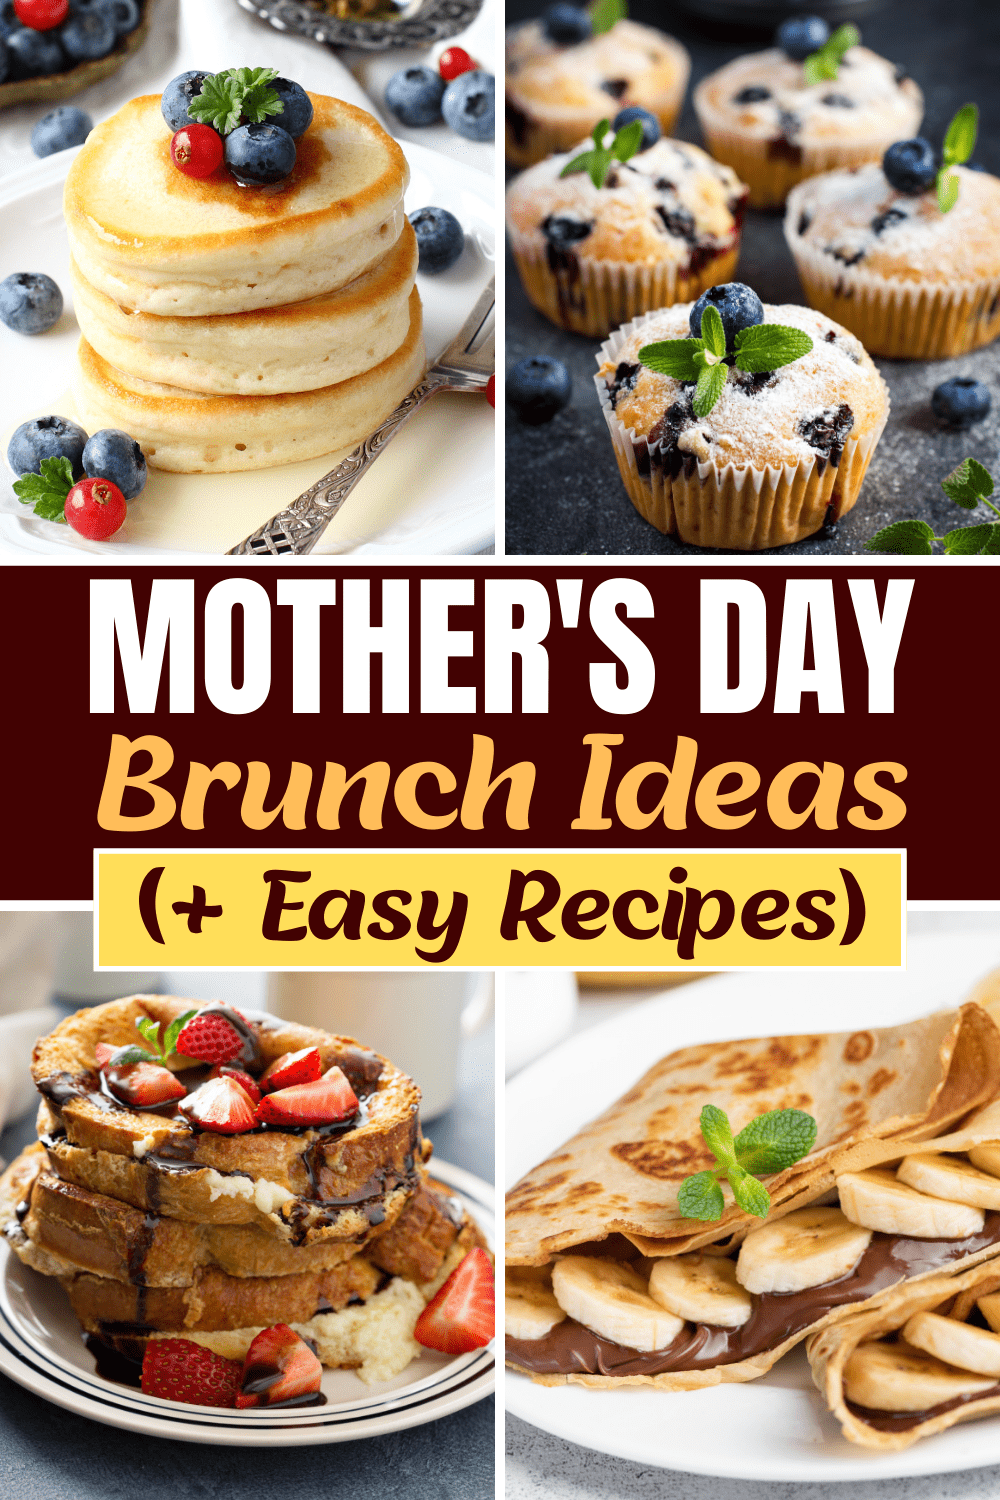 Top 13 Recipes For Mother S Day Brunch Show Mom How Much You www